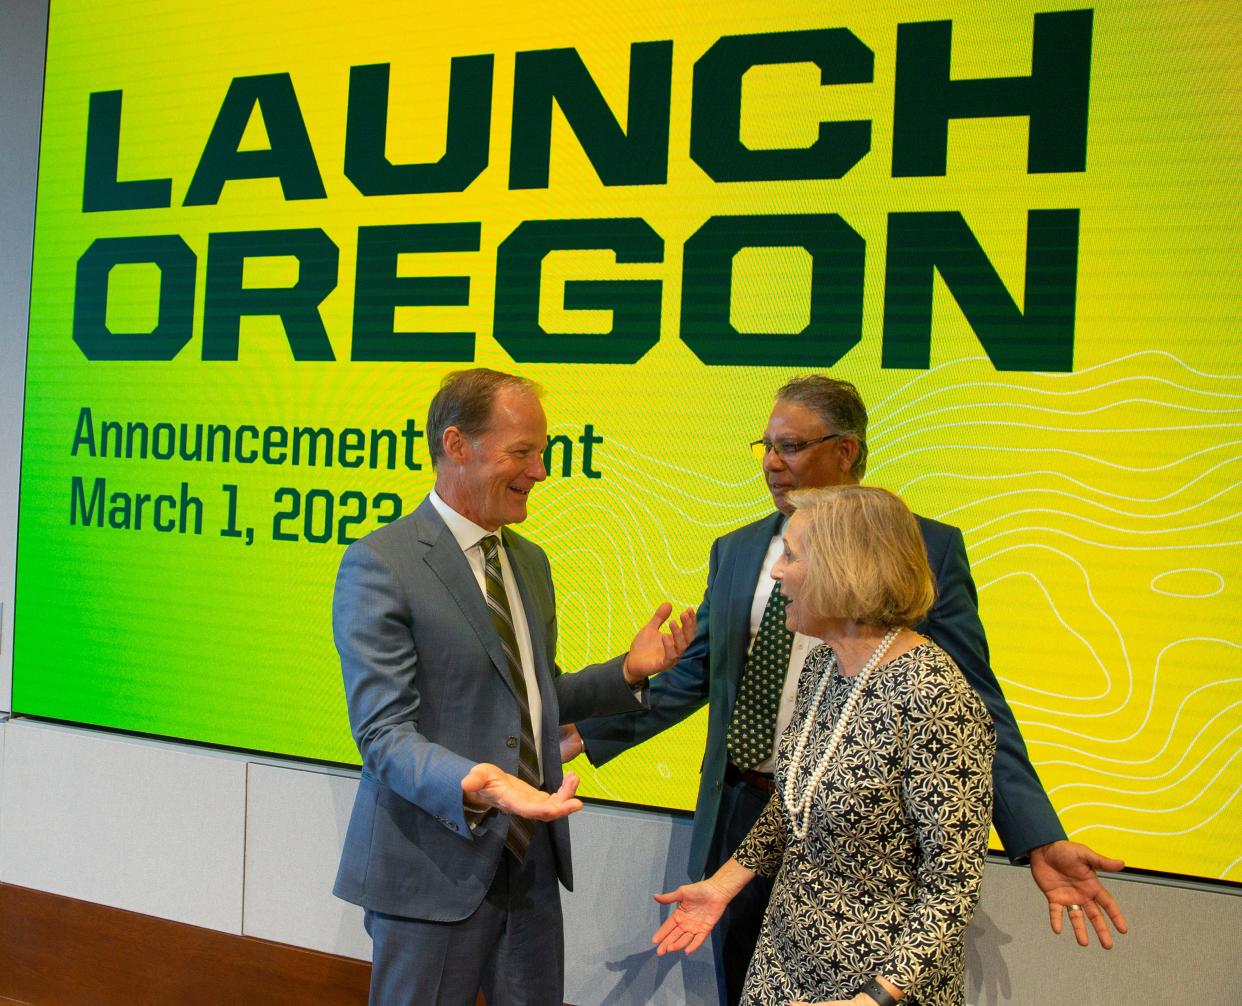 Paul Weinhold, president and CEO of the University of Oregon Foundation board, left, visits with Anshuman Razdan, University of Oregon vice president for research and innovation, and Susan Stevens, chair of the University of Oregon Foundation board, after the announcement of Launch Oregon.